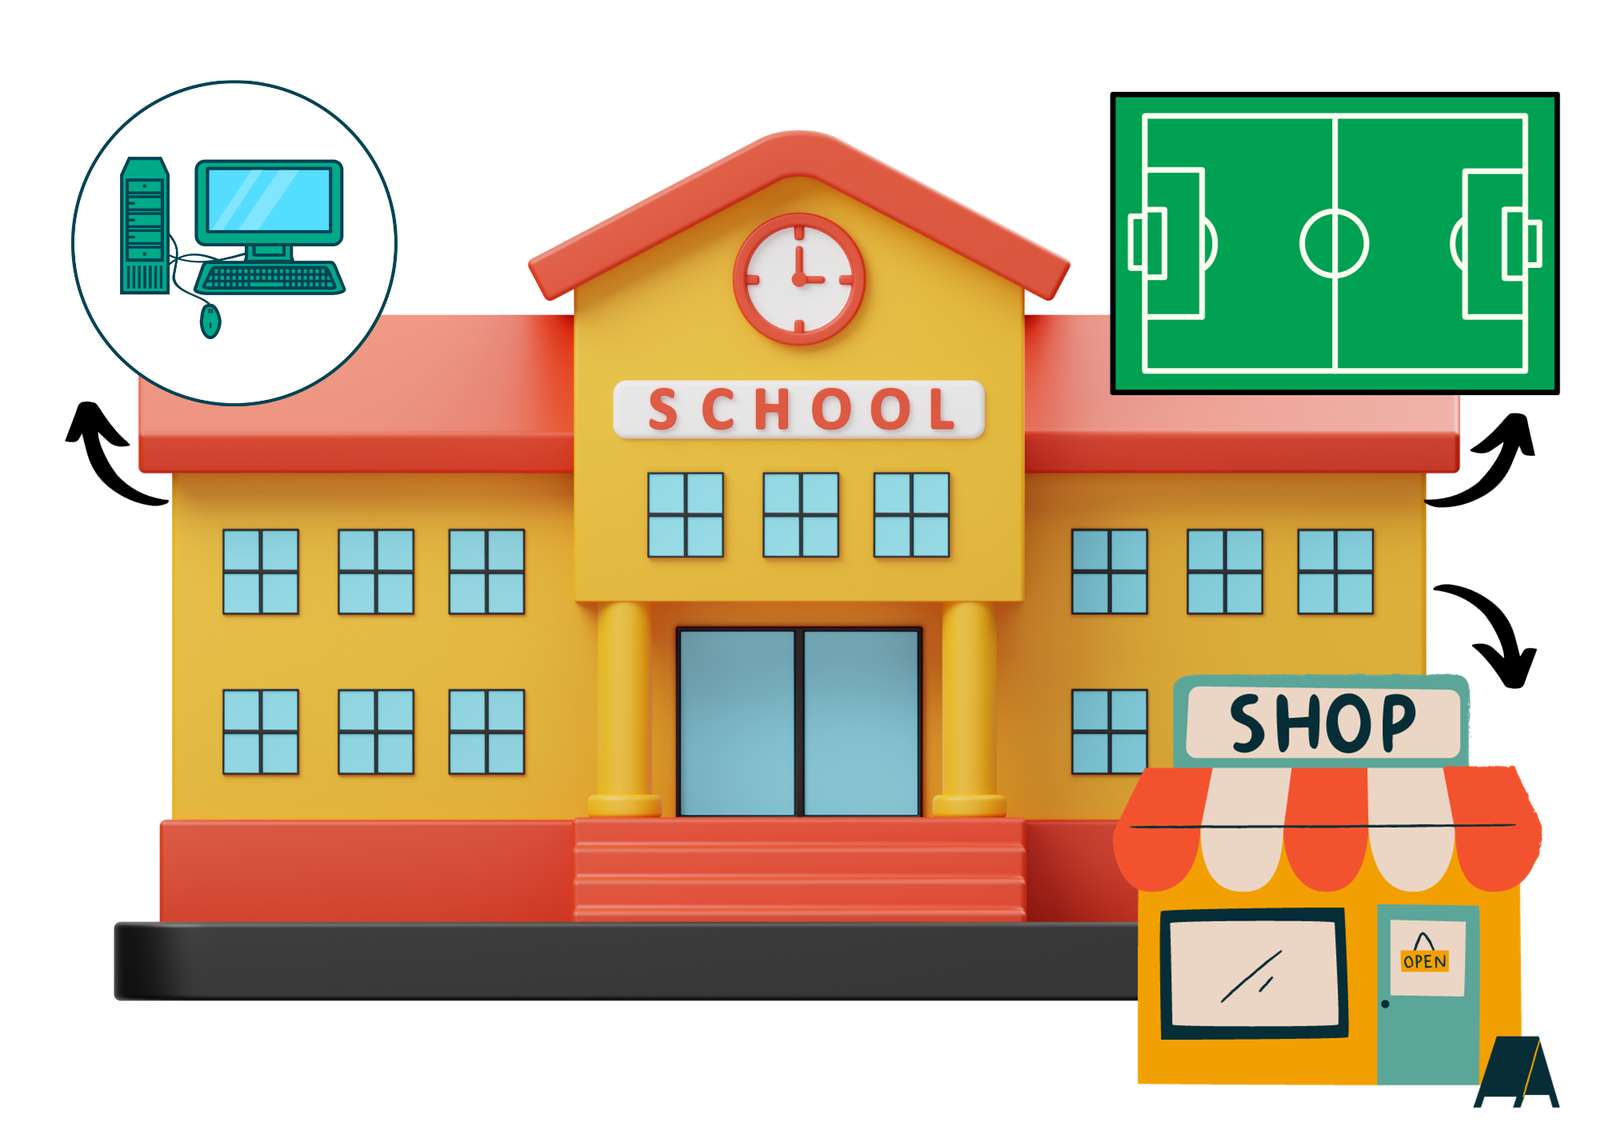 SCHOOL ENVIRONMENT puzzle online from photo